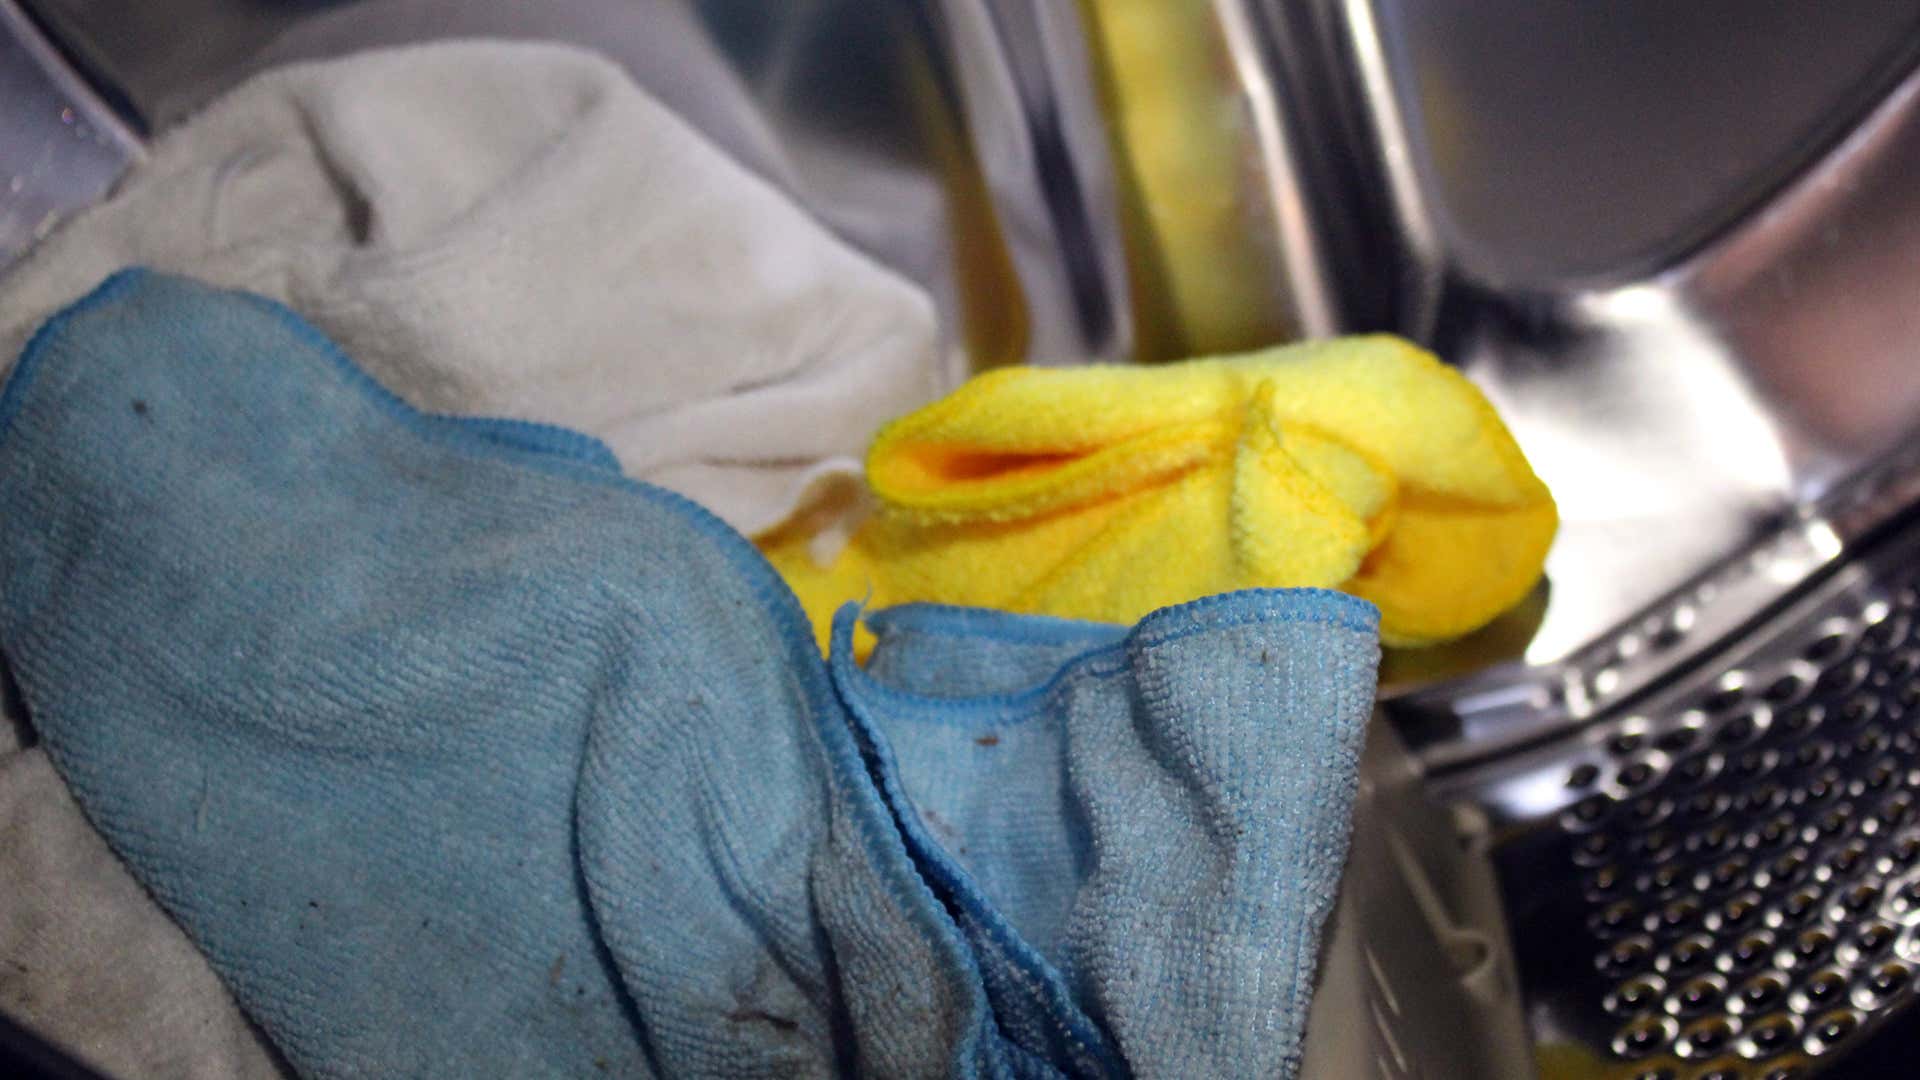 Blue, yellow, and white microfiber towels in a washing machine tub.